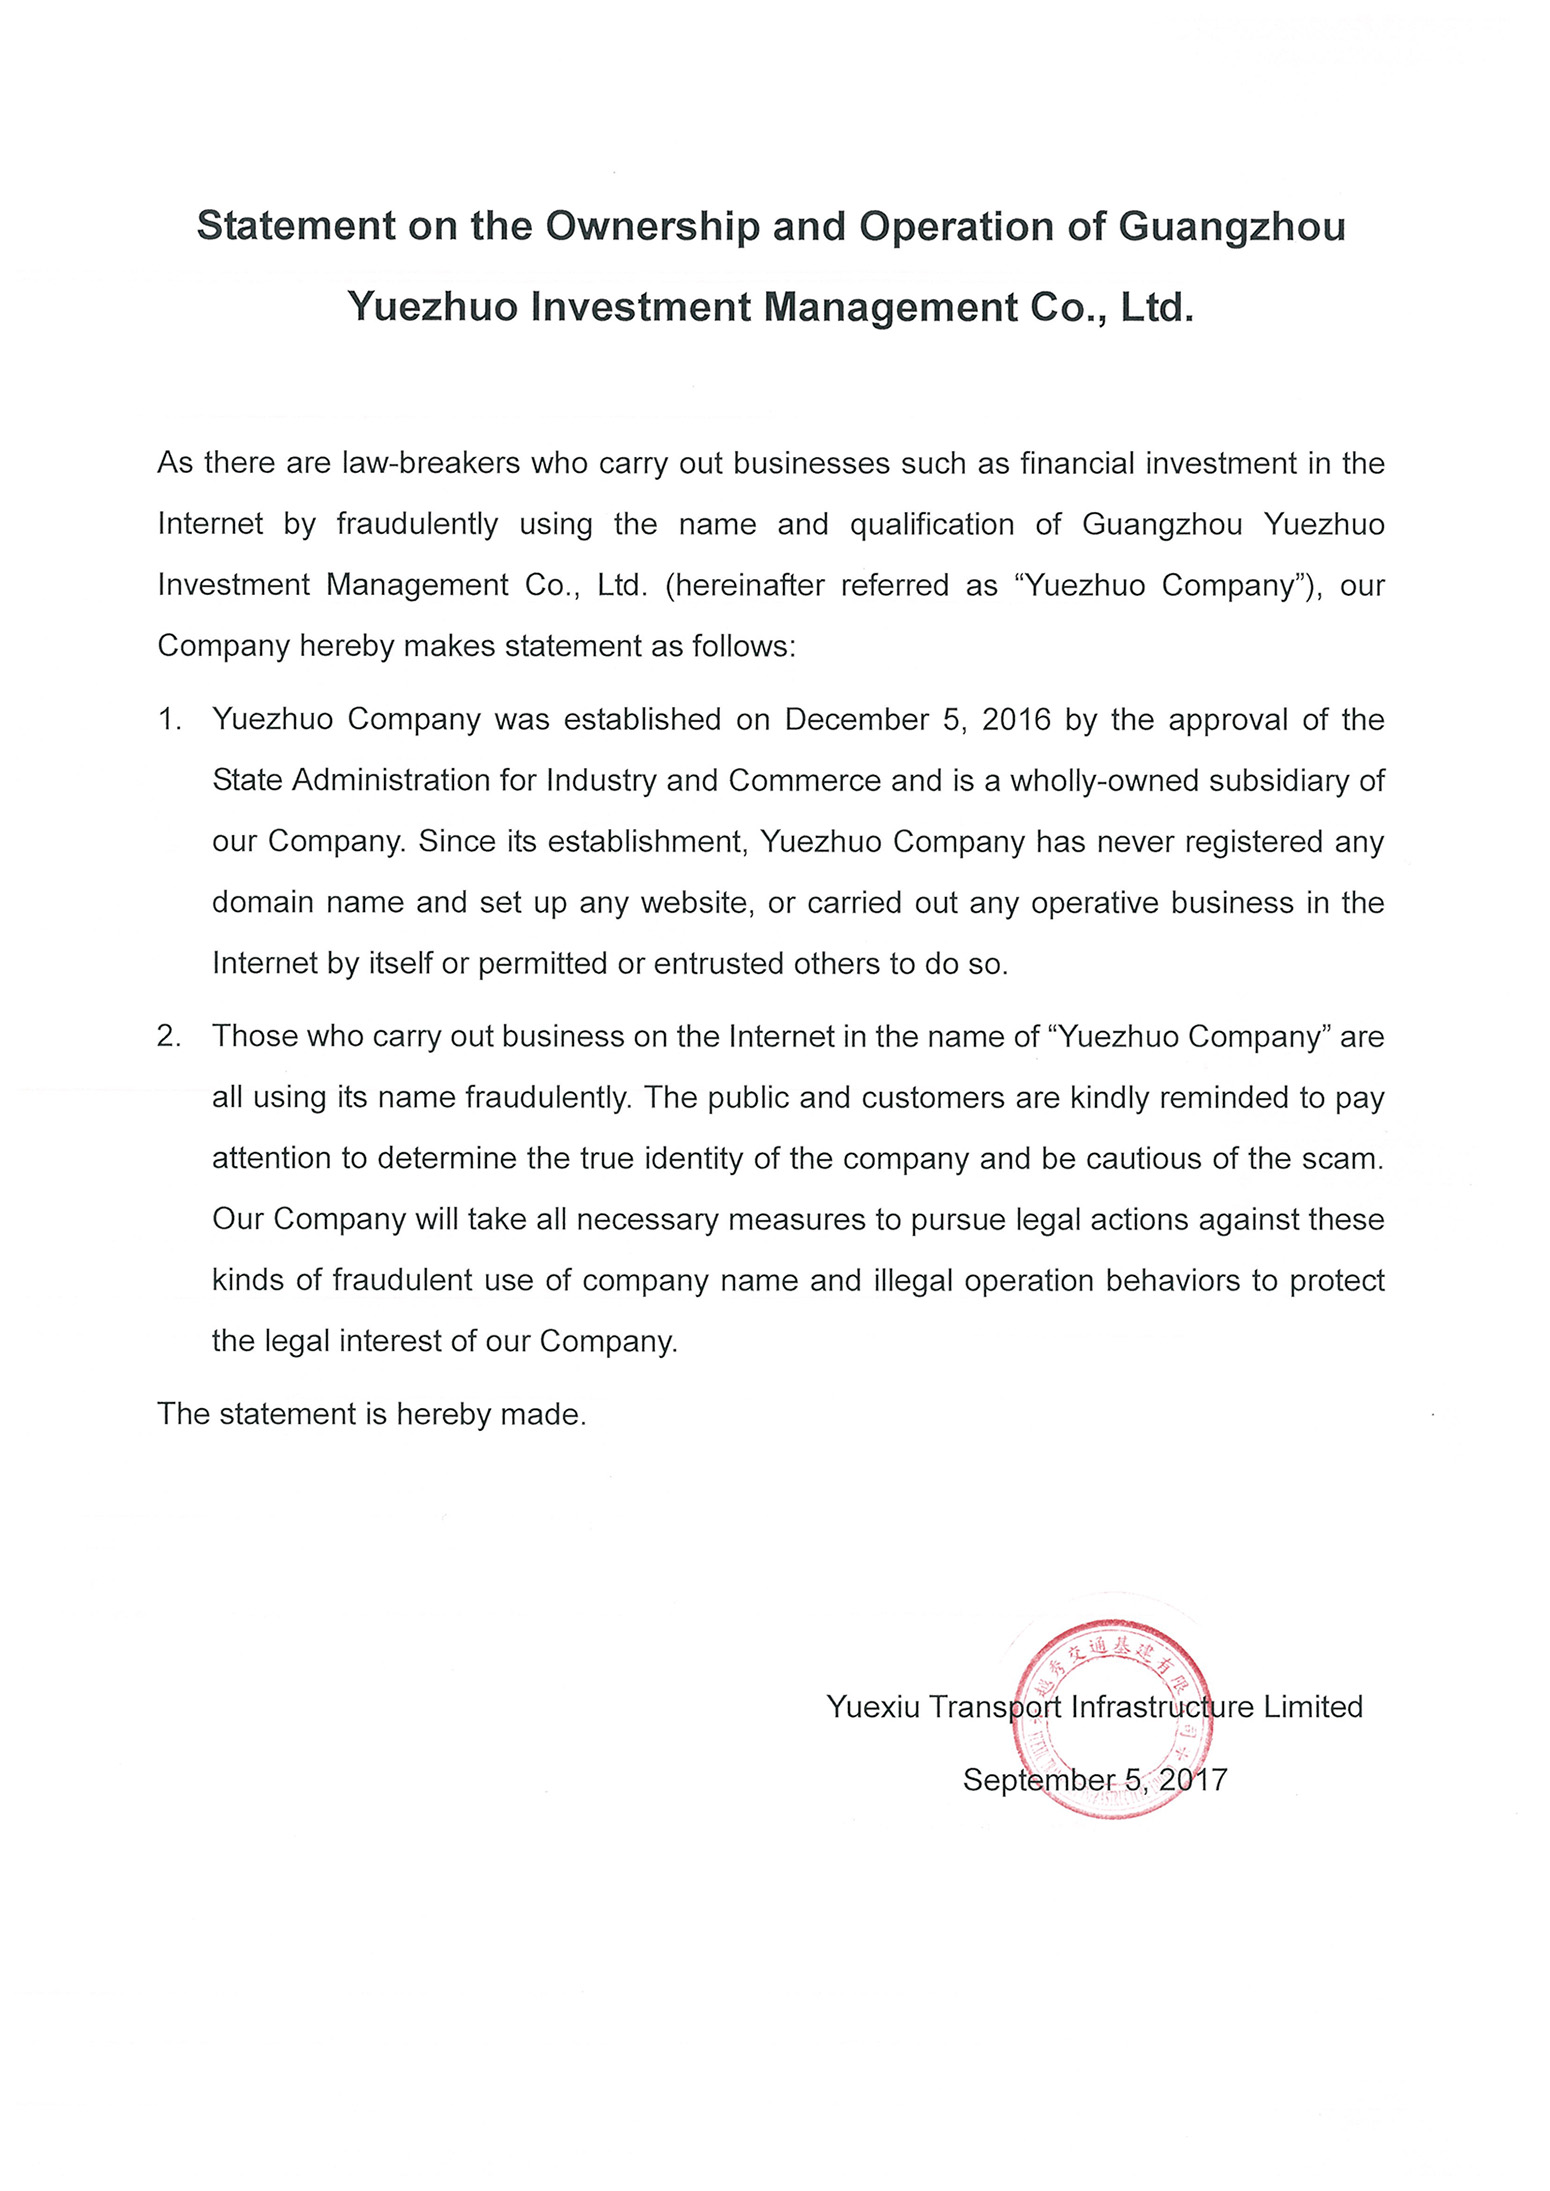 Statement on the Operation Condition of Guangzhou Yuezhuo Investment Management Co., Ltd.